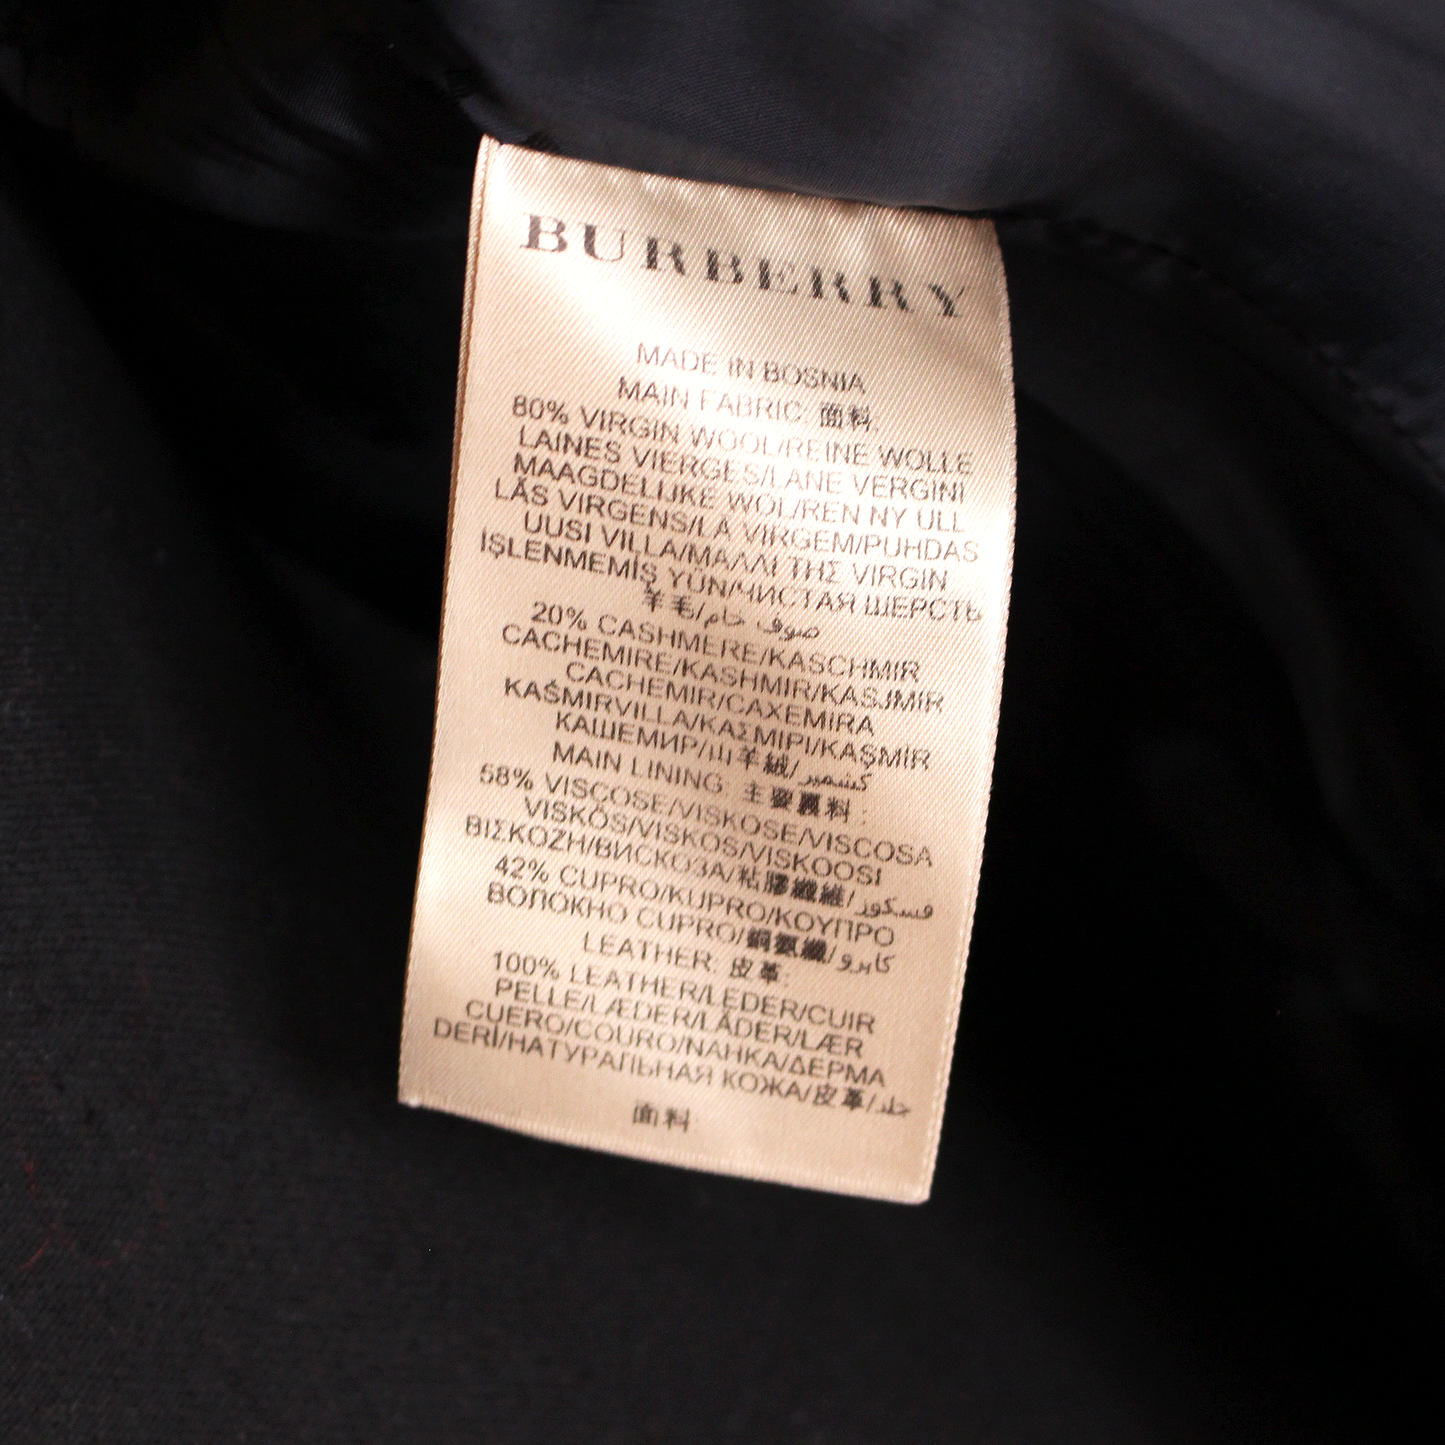 Burberry Wool Cashmere Peacoat